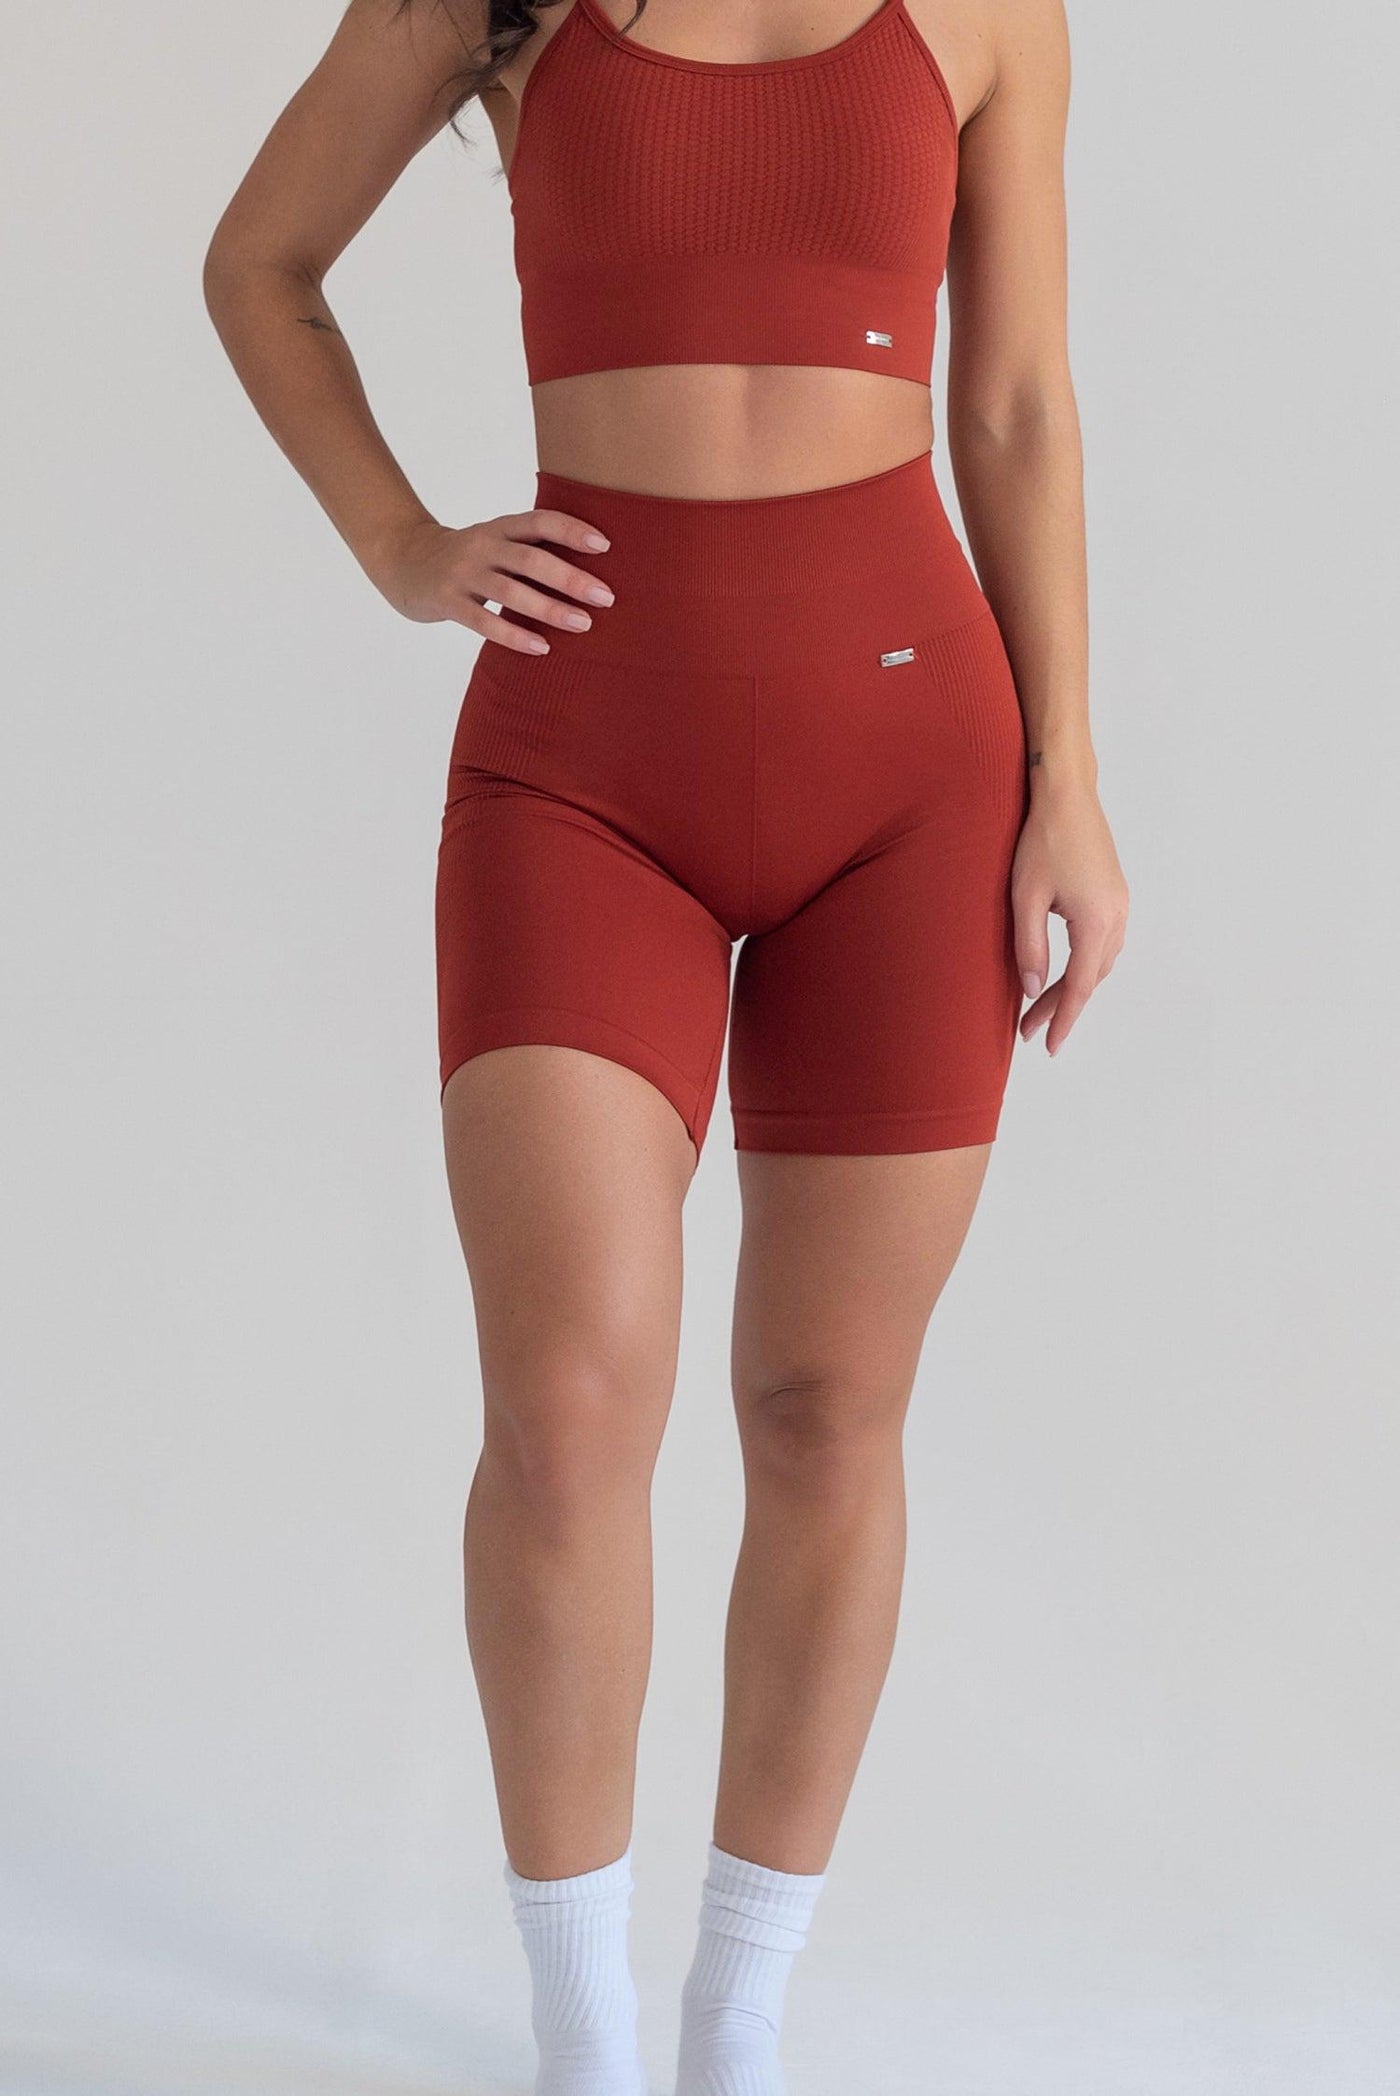 Bliss Biker Push-Up en Chili-Bikers-Tienda Ropa Leggings Yoga Sostenibles Reciclados Mujer On-line Barcelona Believe Athletics Sustainable Recycled Yoga Clothes